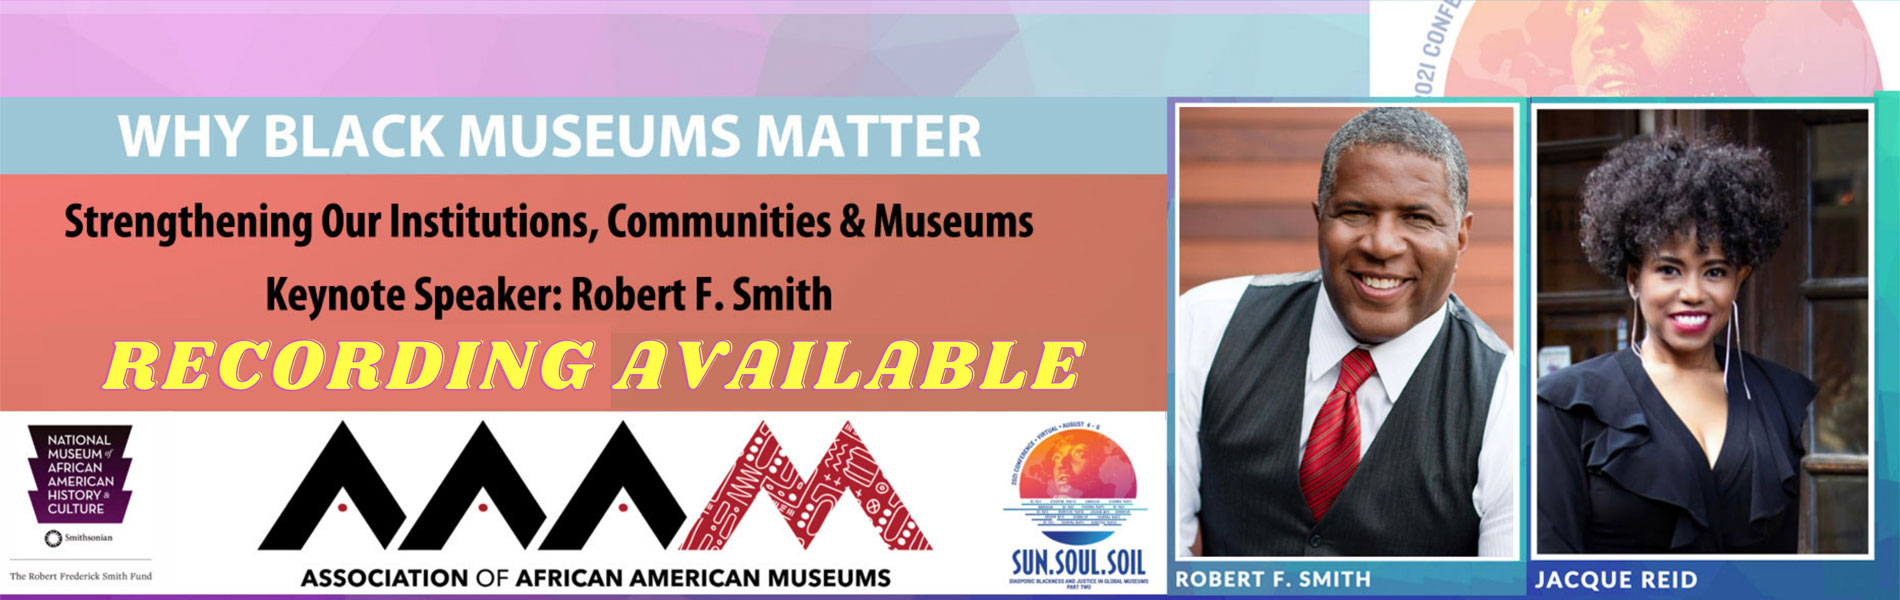 Association of African American Museums The official web site of